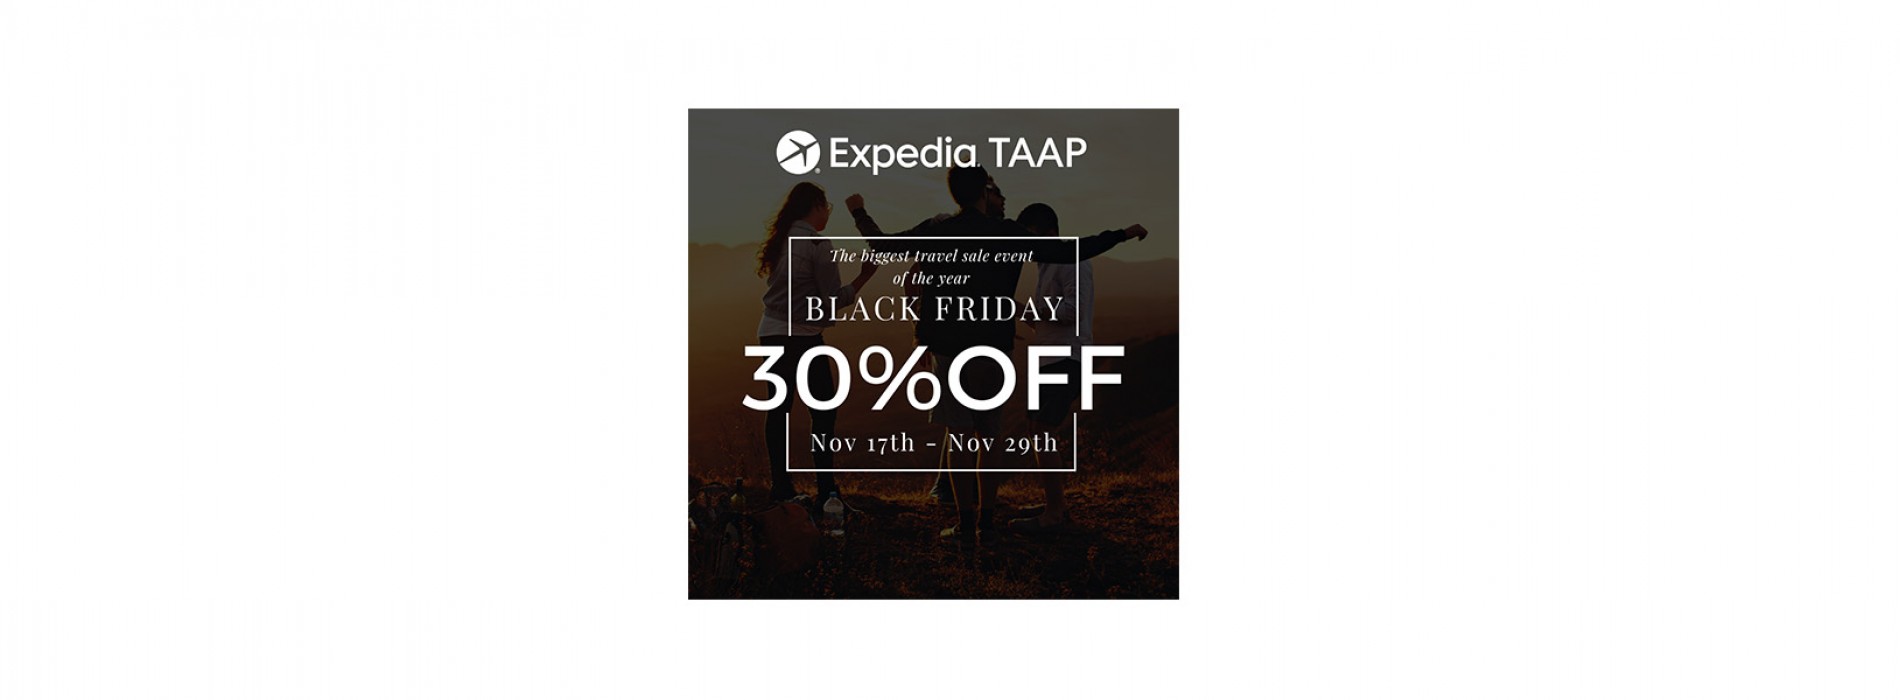 Expedia TAAP agents prepare for Black Friday